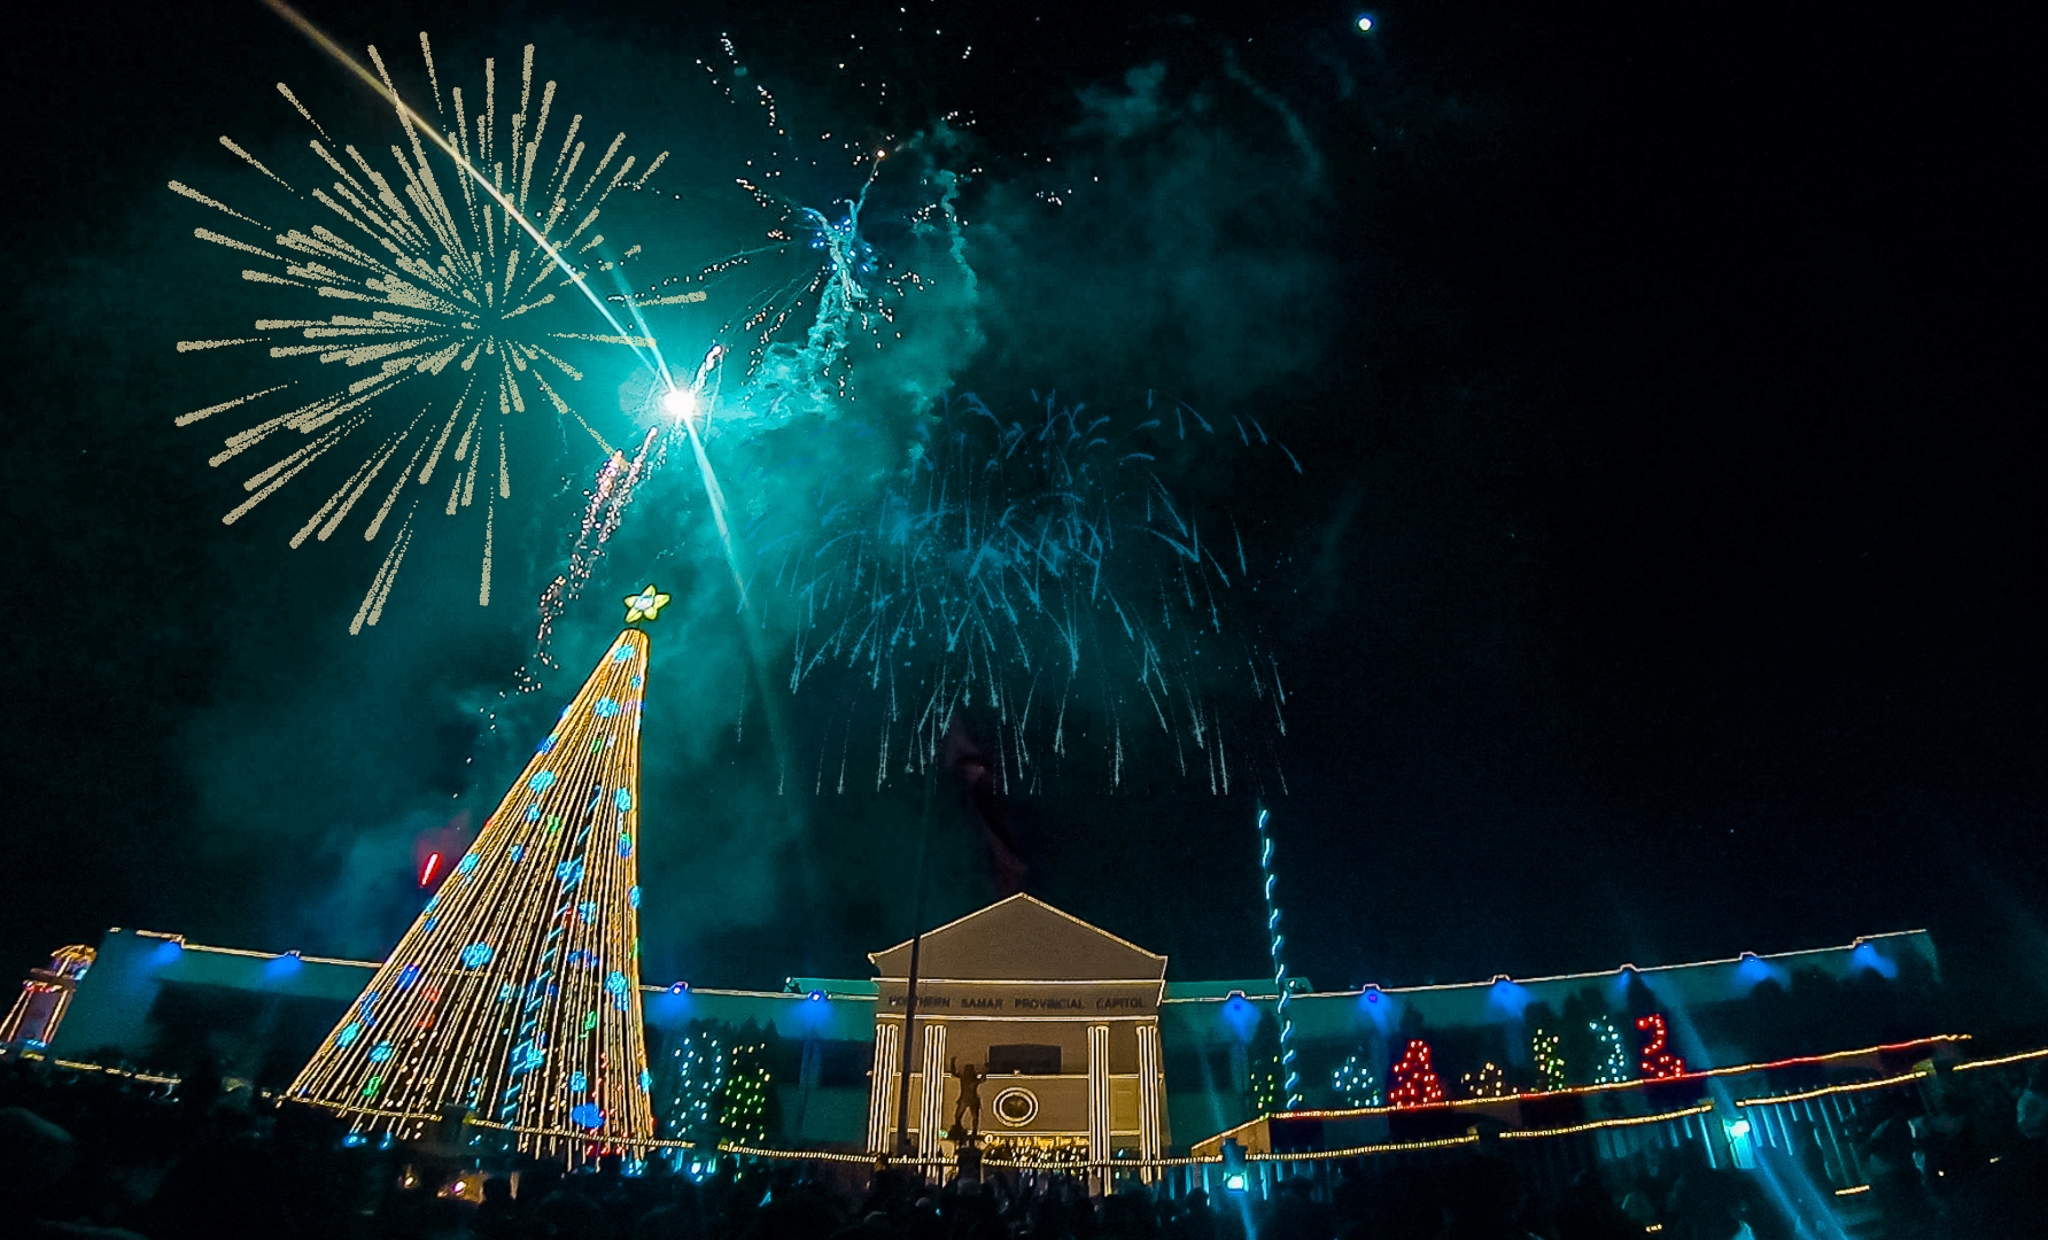 The giant Christmas tree inside the provincial capitol compound in Catarman town, Northern Samar